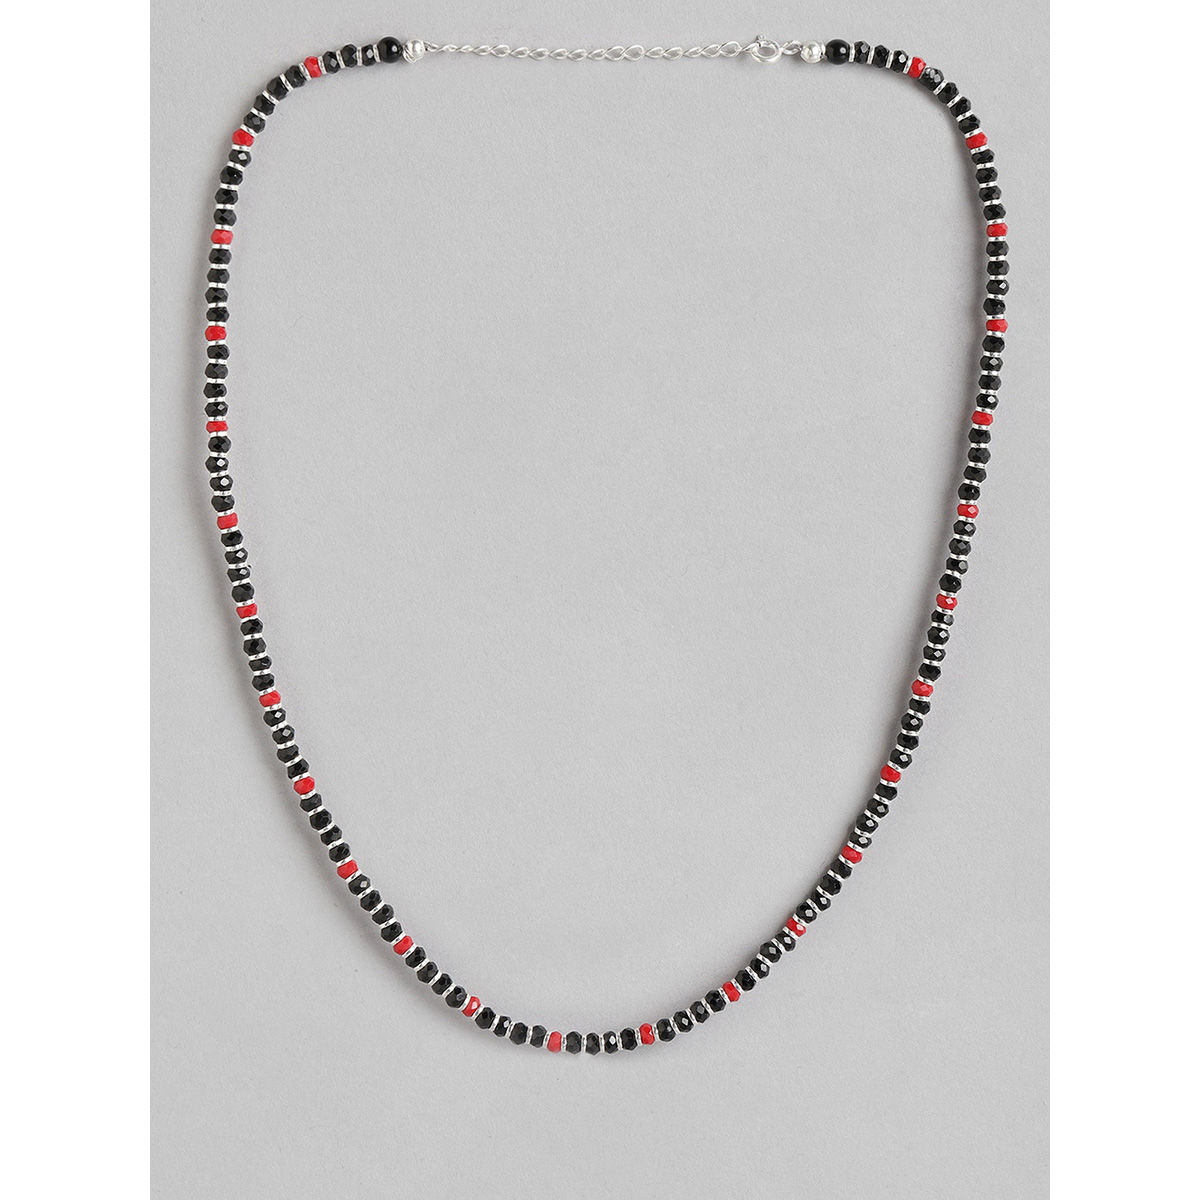 Buy the Black Onyx Red and Silver Mens Beaded Necklace | JaeBee